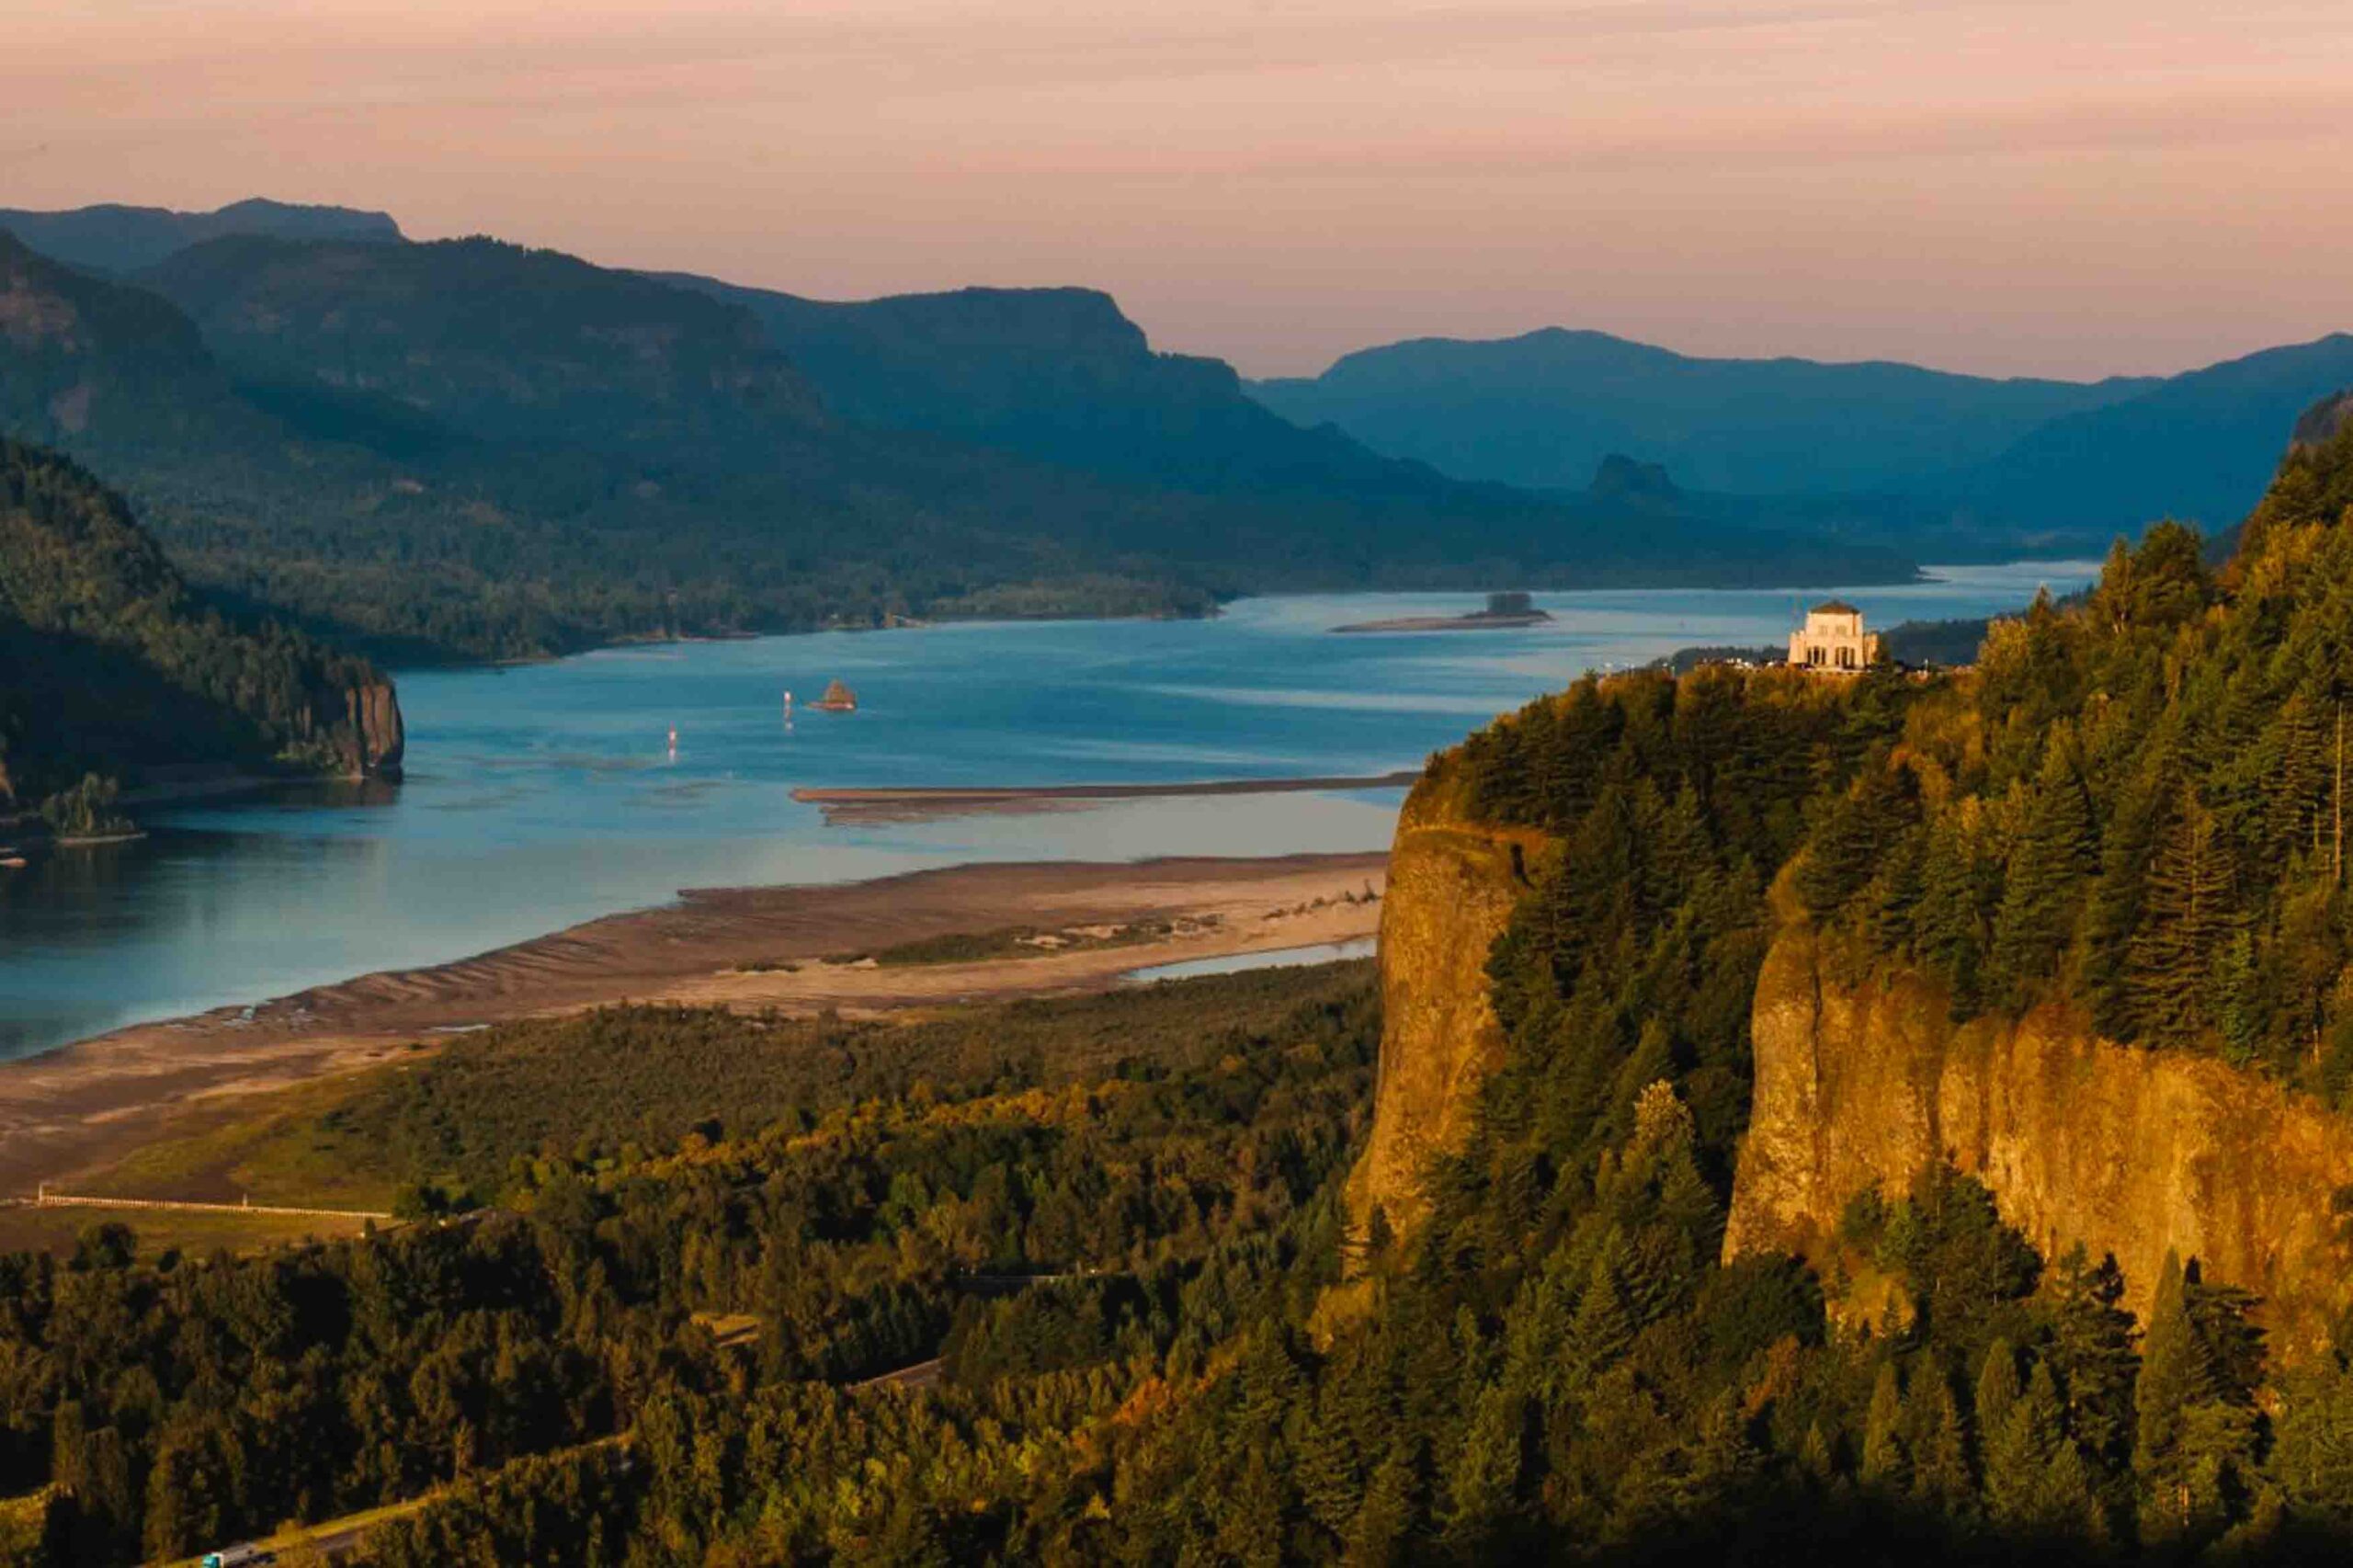 View of the Vista House along the Columbia River Gorge with the river and mountains in the background at sunset